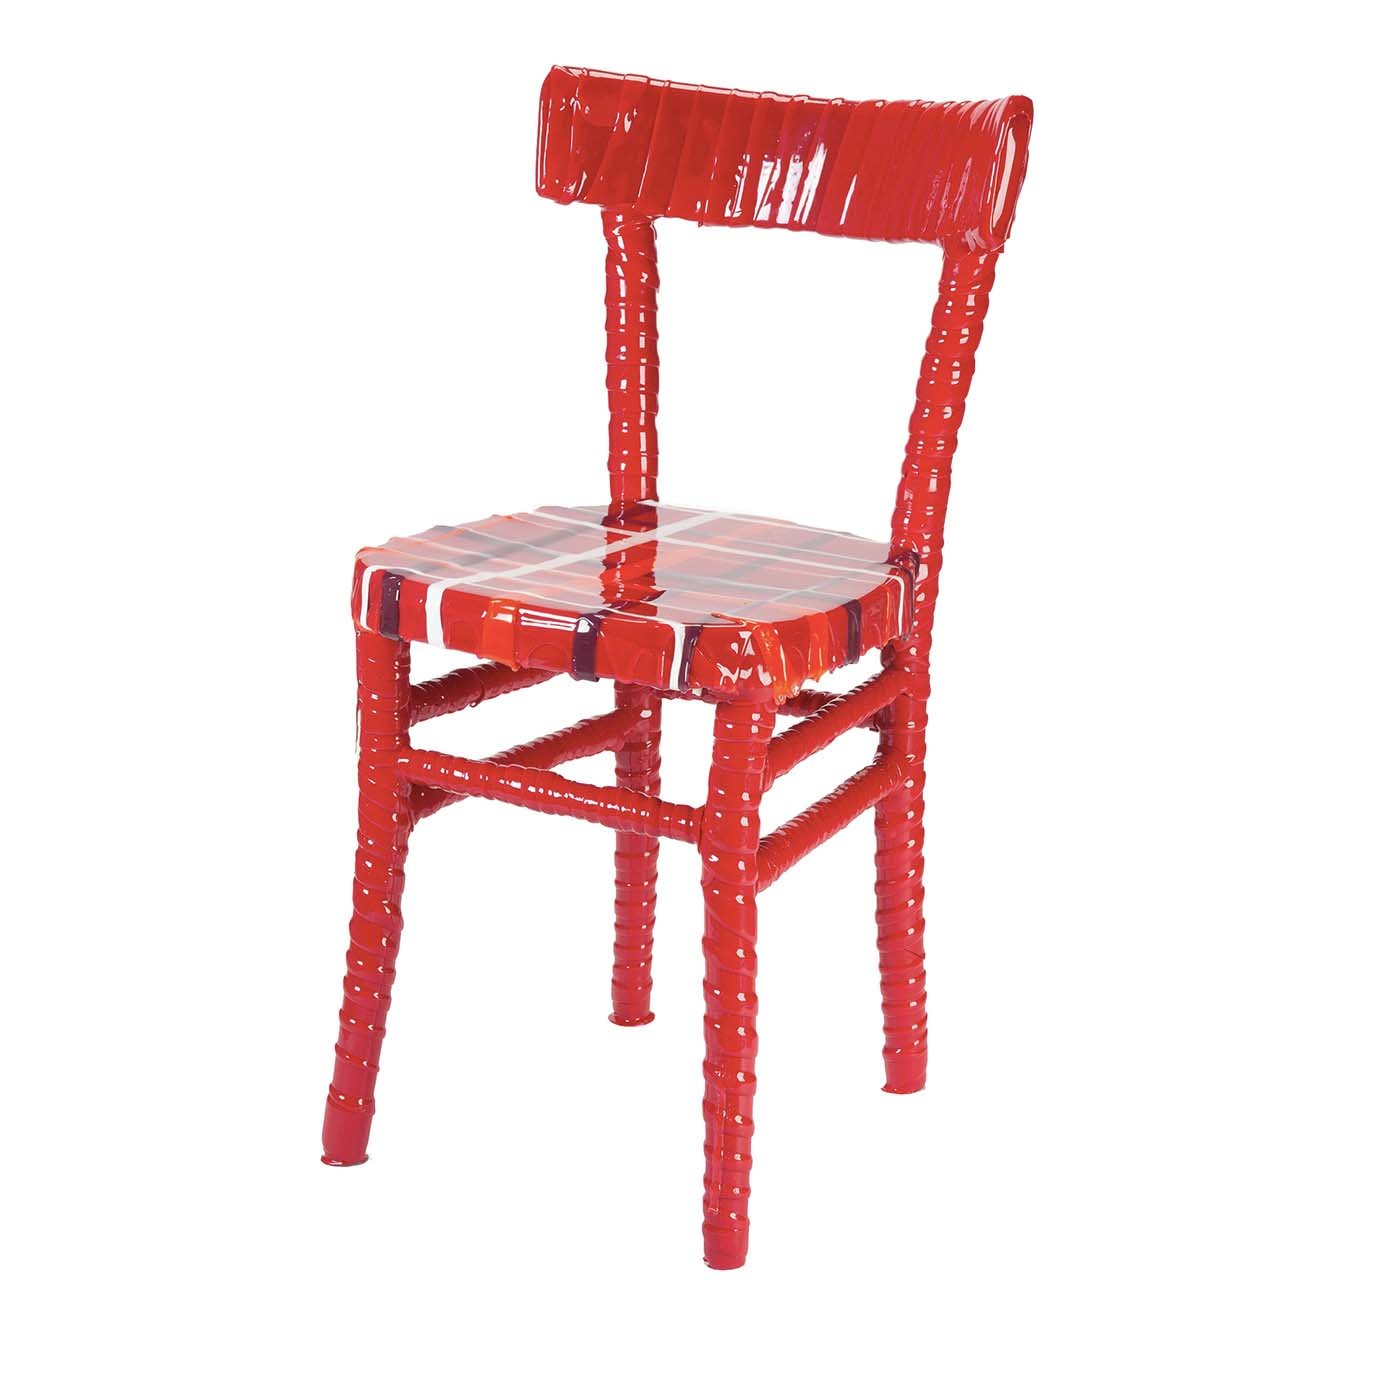 N. 02/20 One-Off striped red resin chair by Paola Navone - Main view